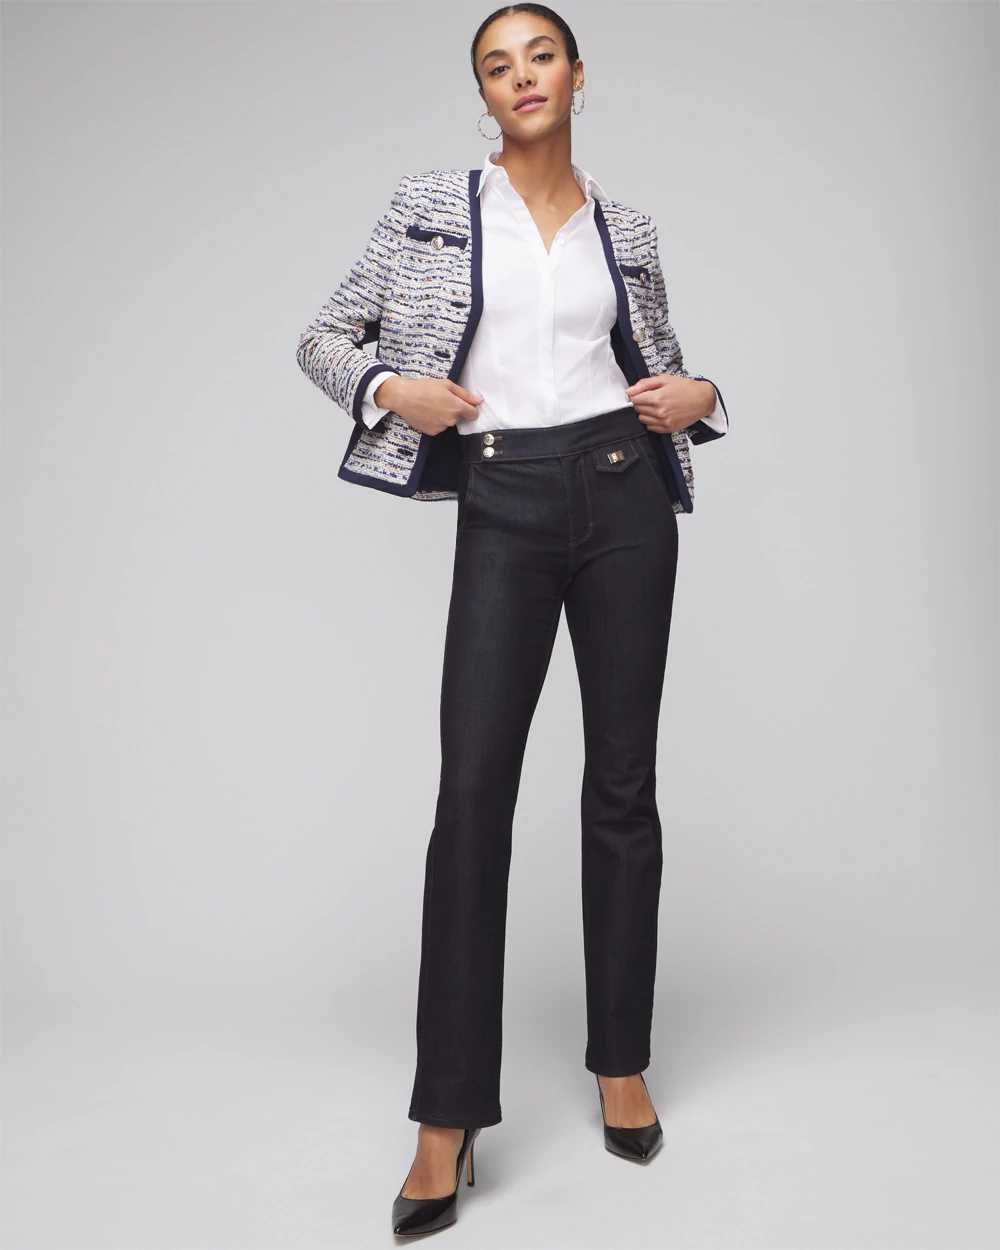 Long Sleeve Seamed Detail Poplin Shirt click to view larger image.